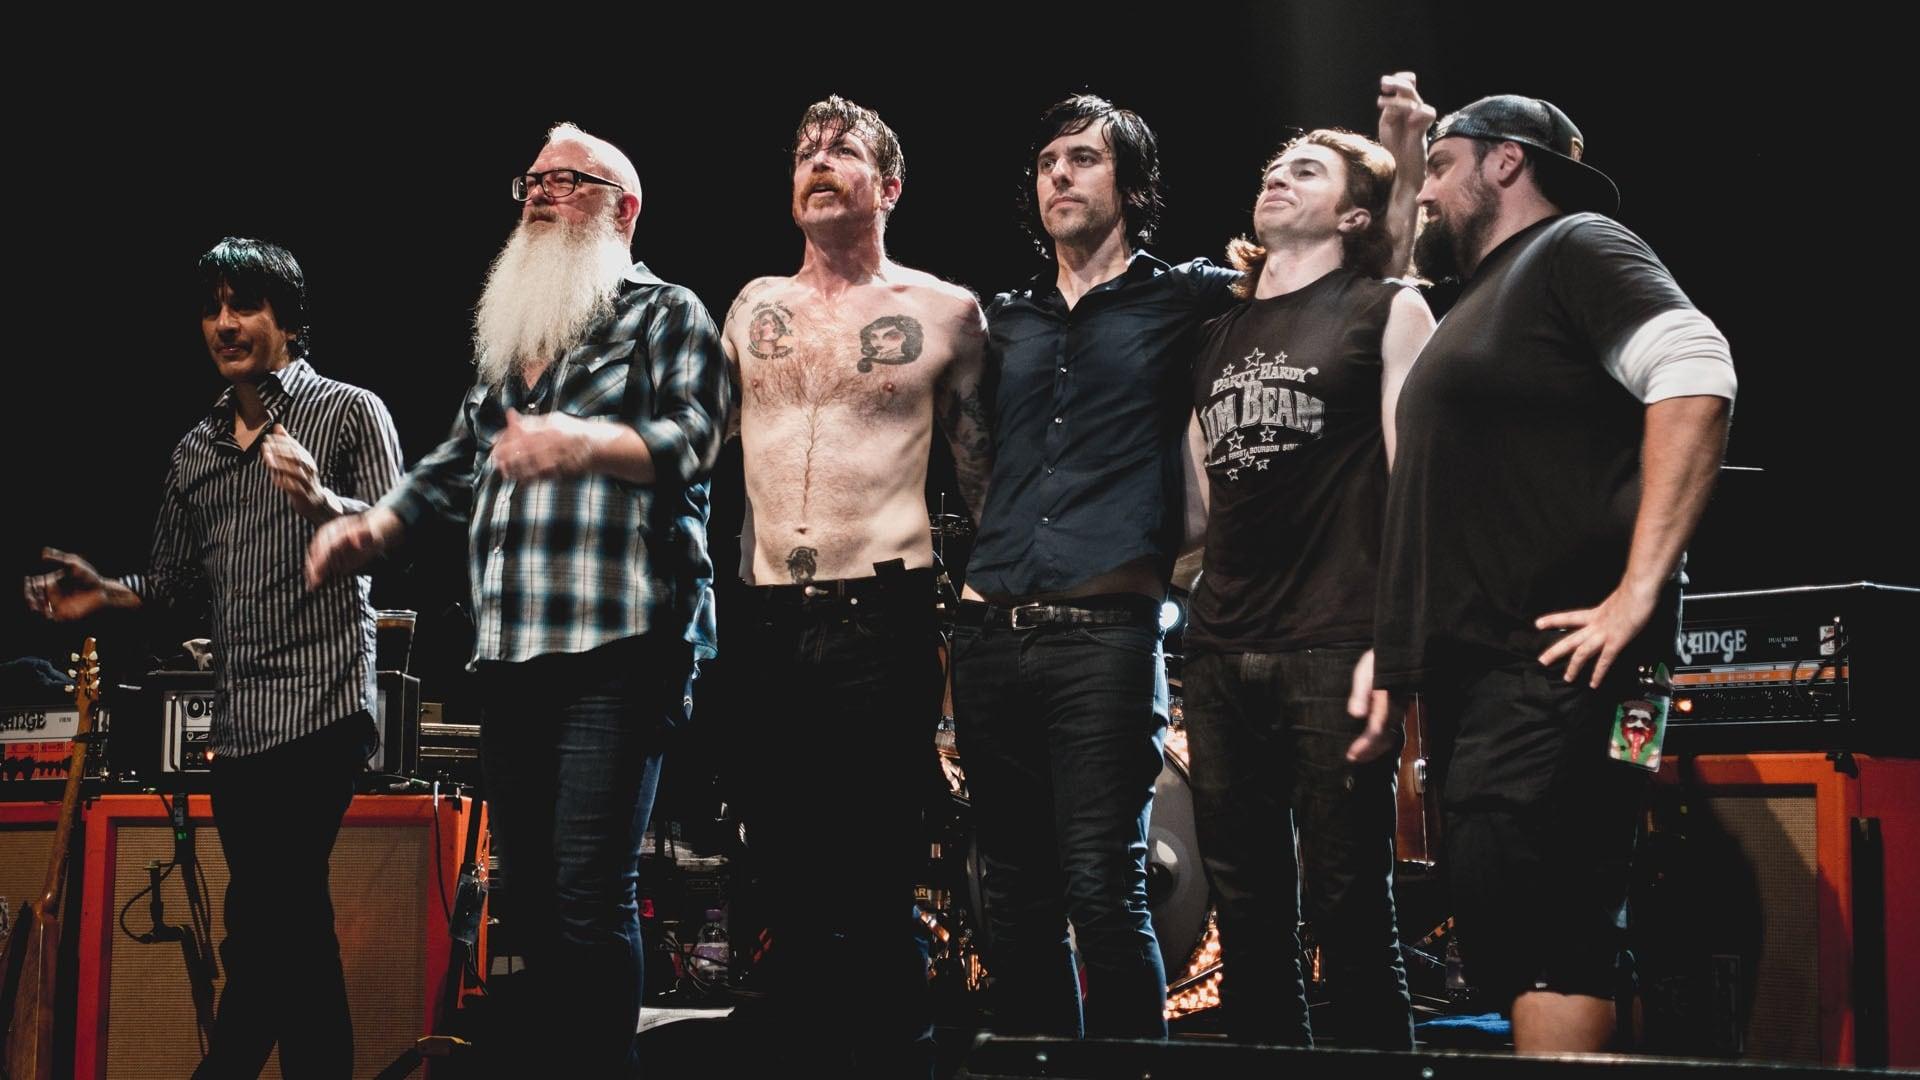 Eagles of Death Metal - I Love You All The Time: Live At The Olympia in Paris backdrop